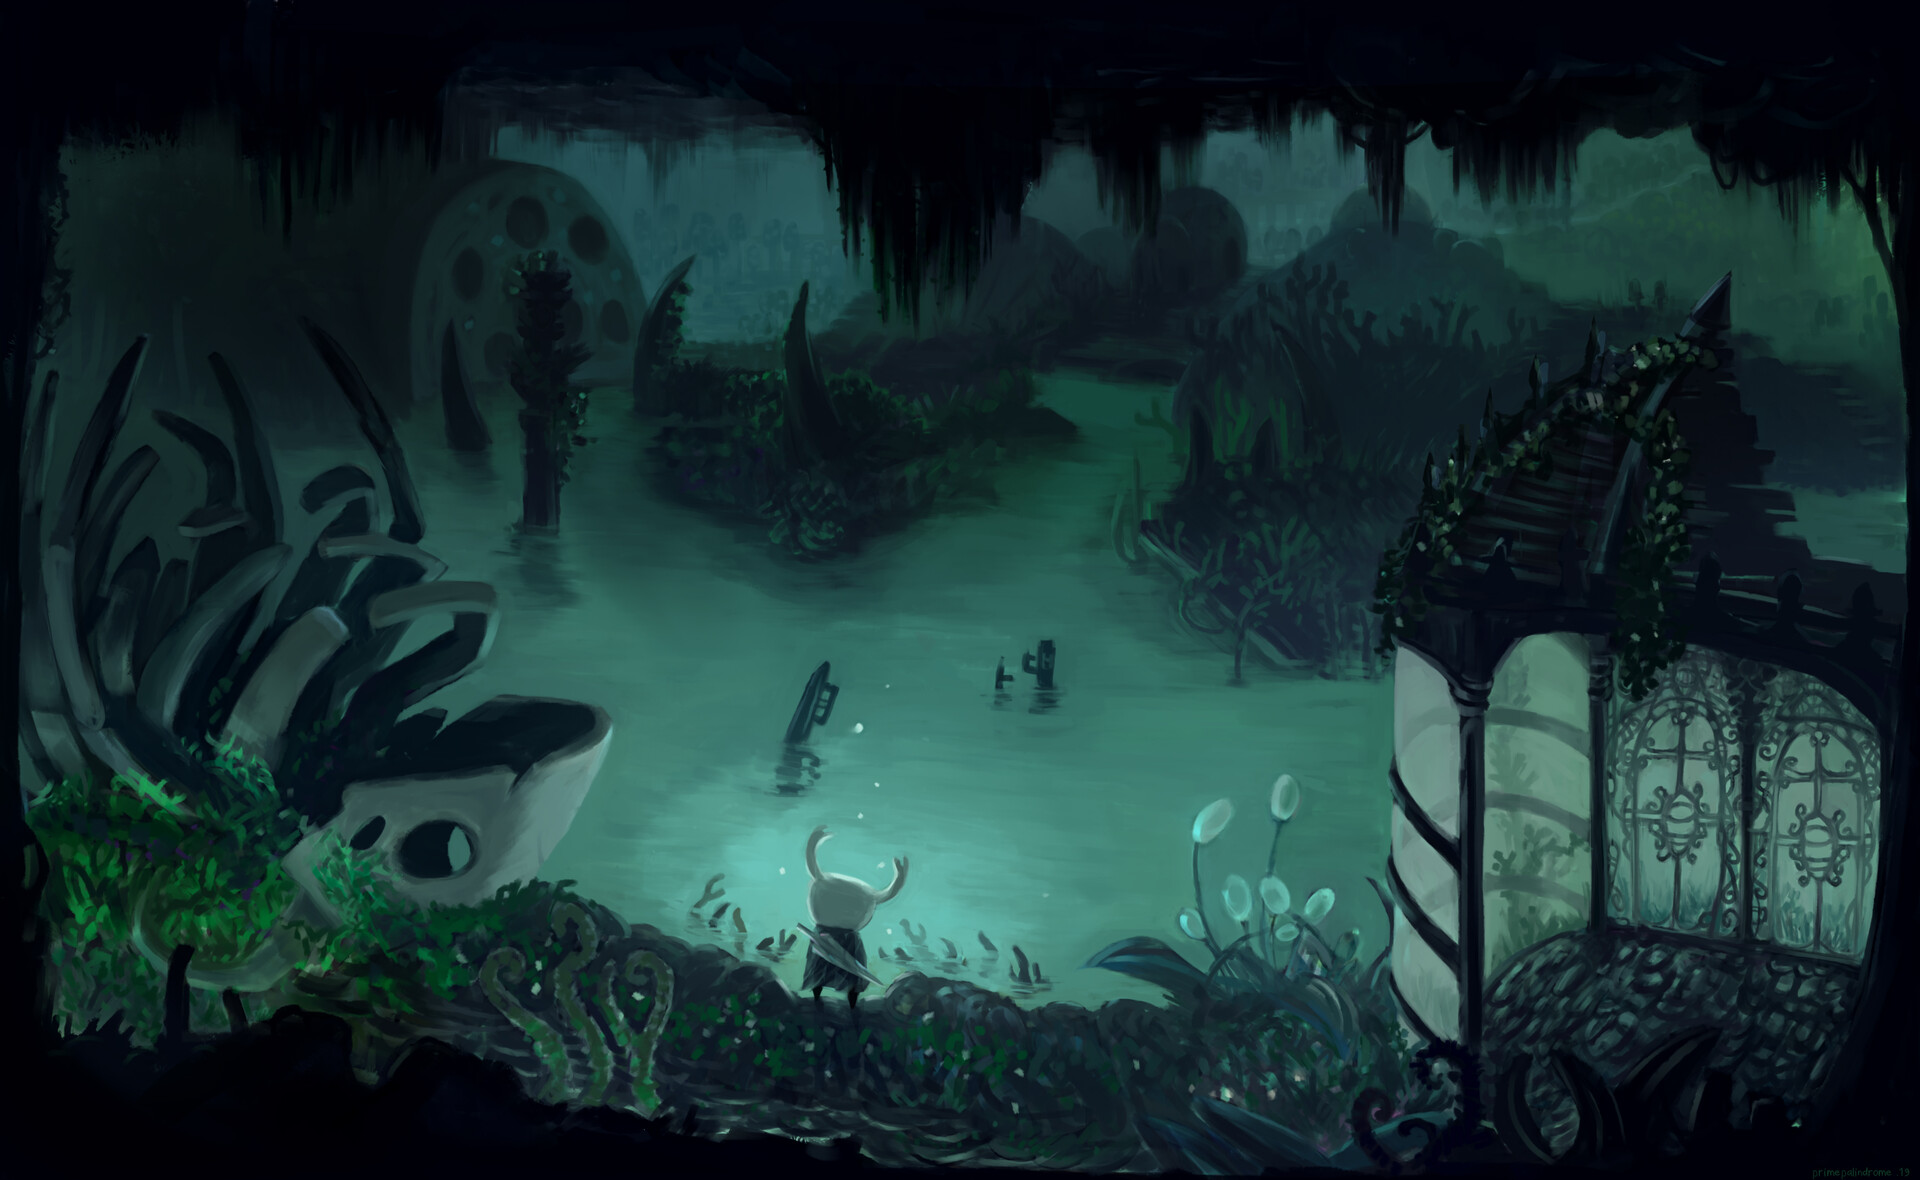 ...quot; I made this for an environment design challenge on Hollow knight. 